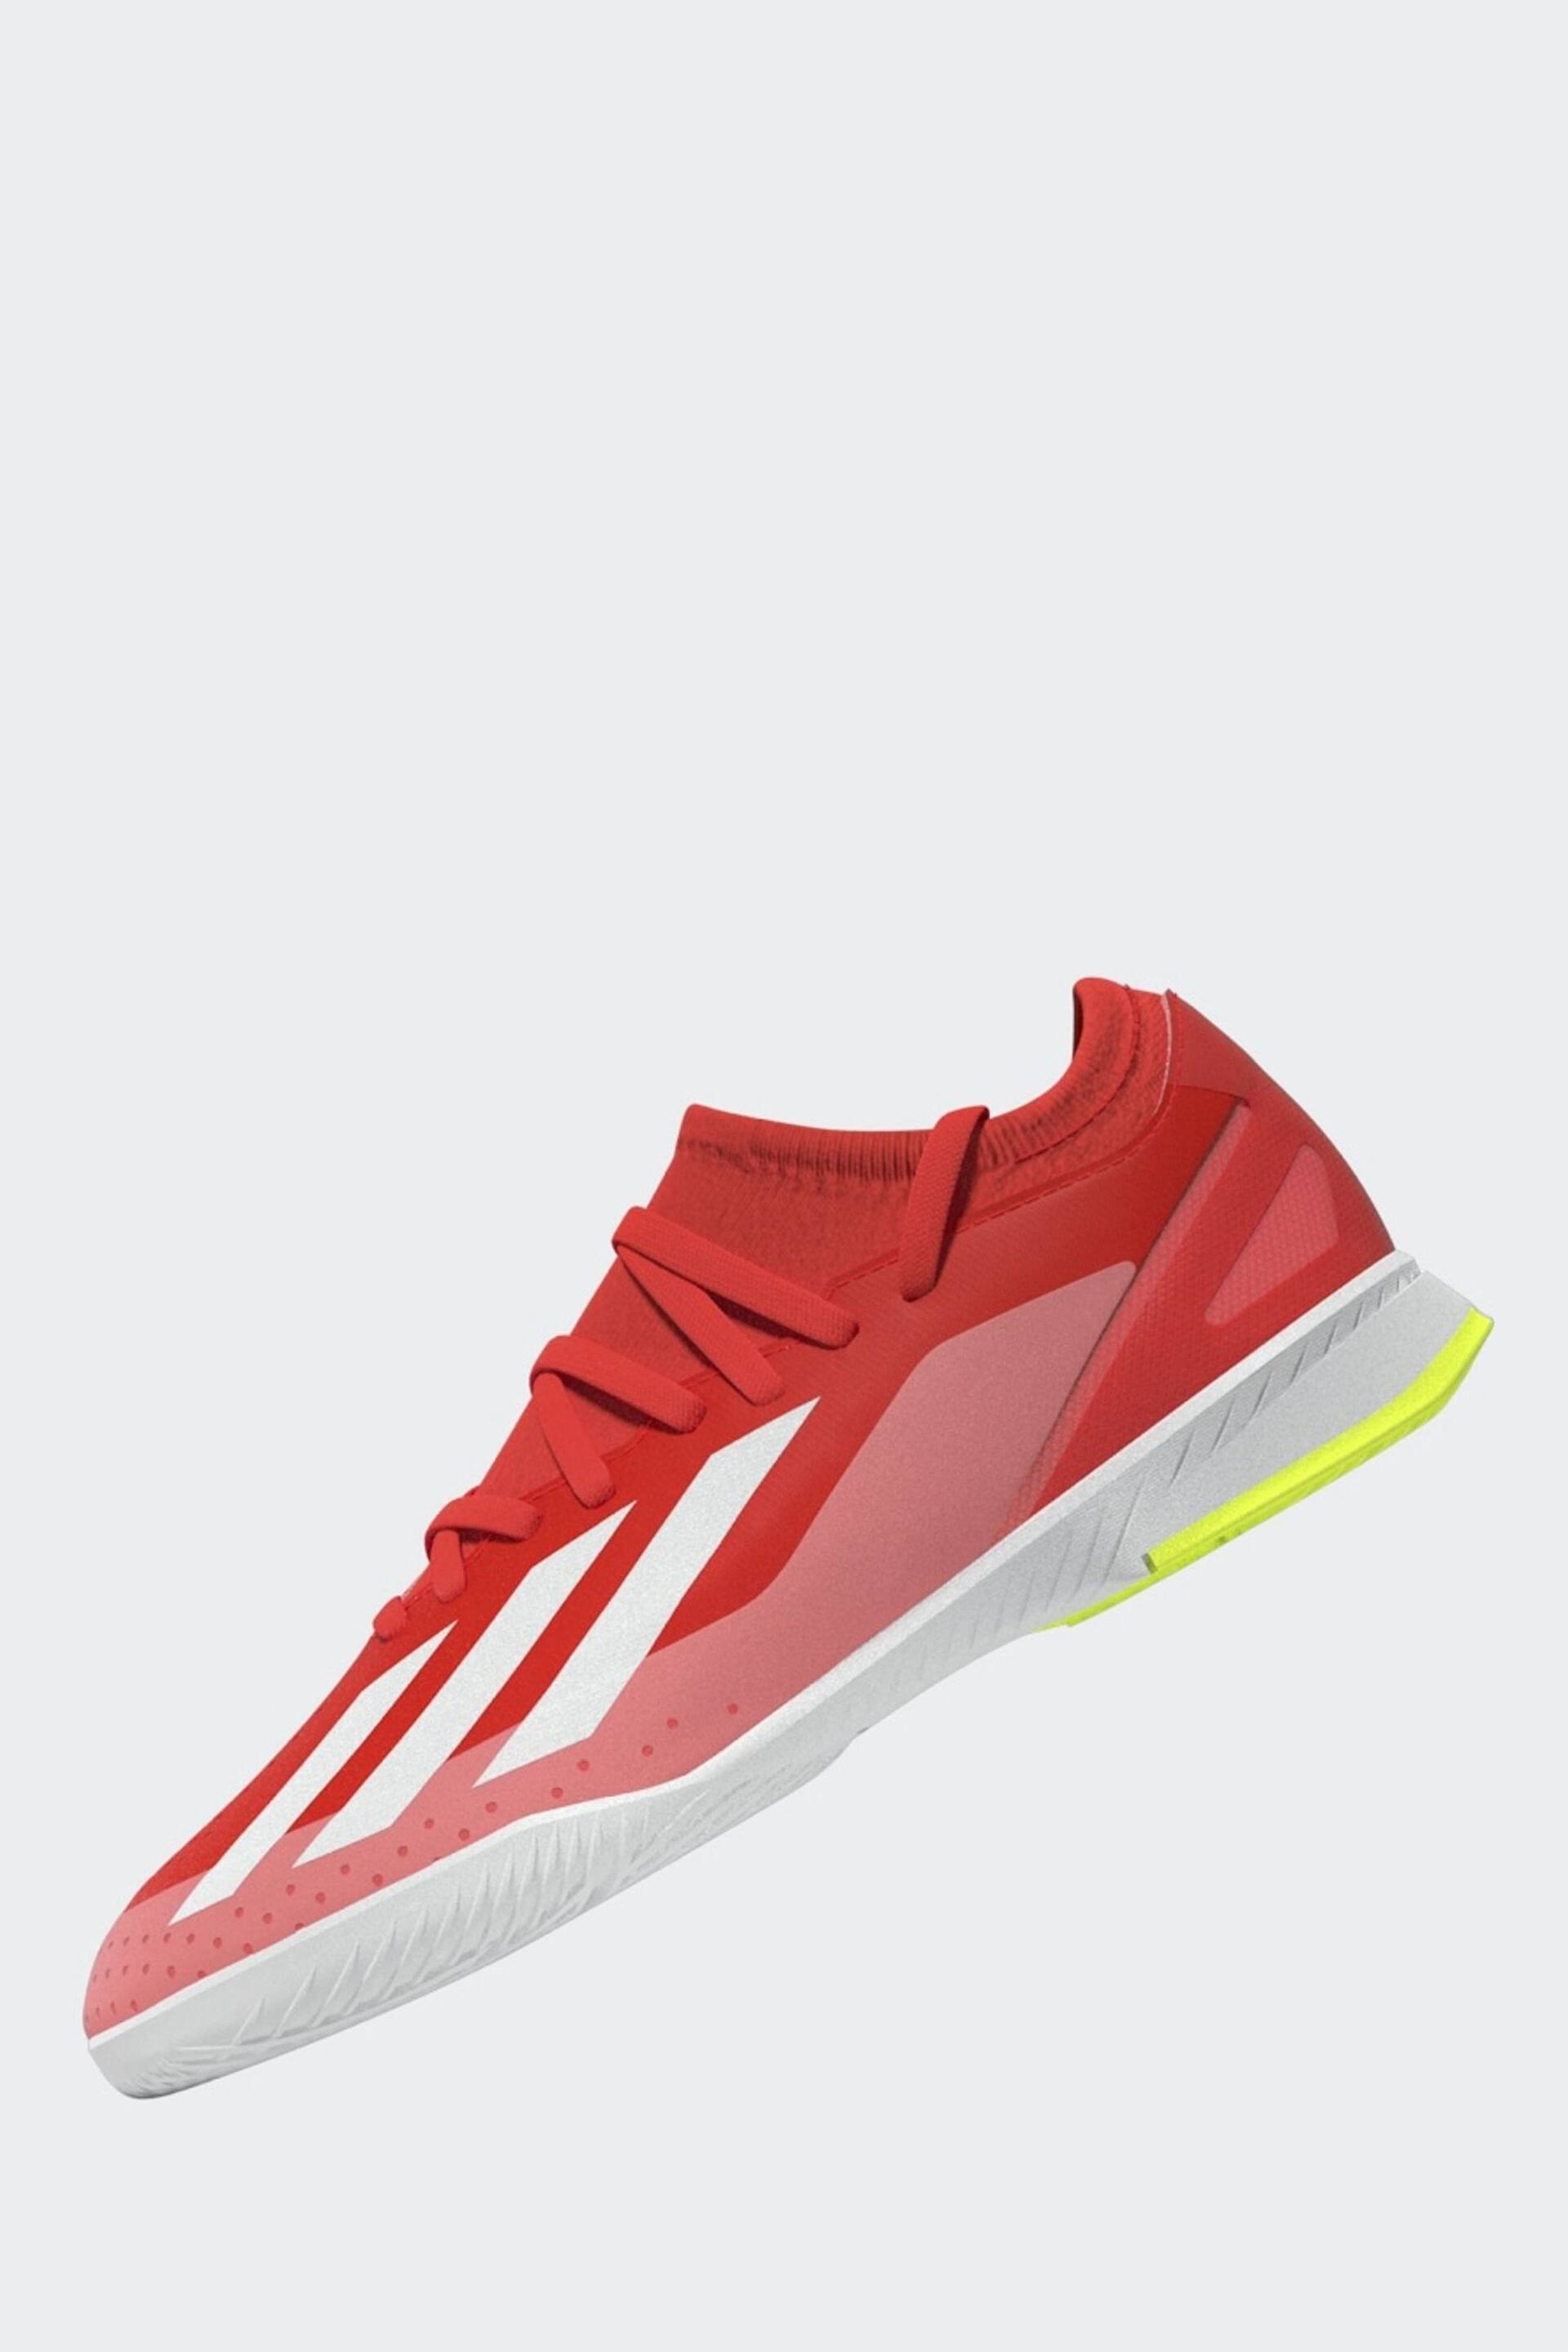 adidas Red/White Football X Crazyfast League Indoor Kids Boots - Image 7 of 20